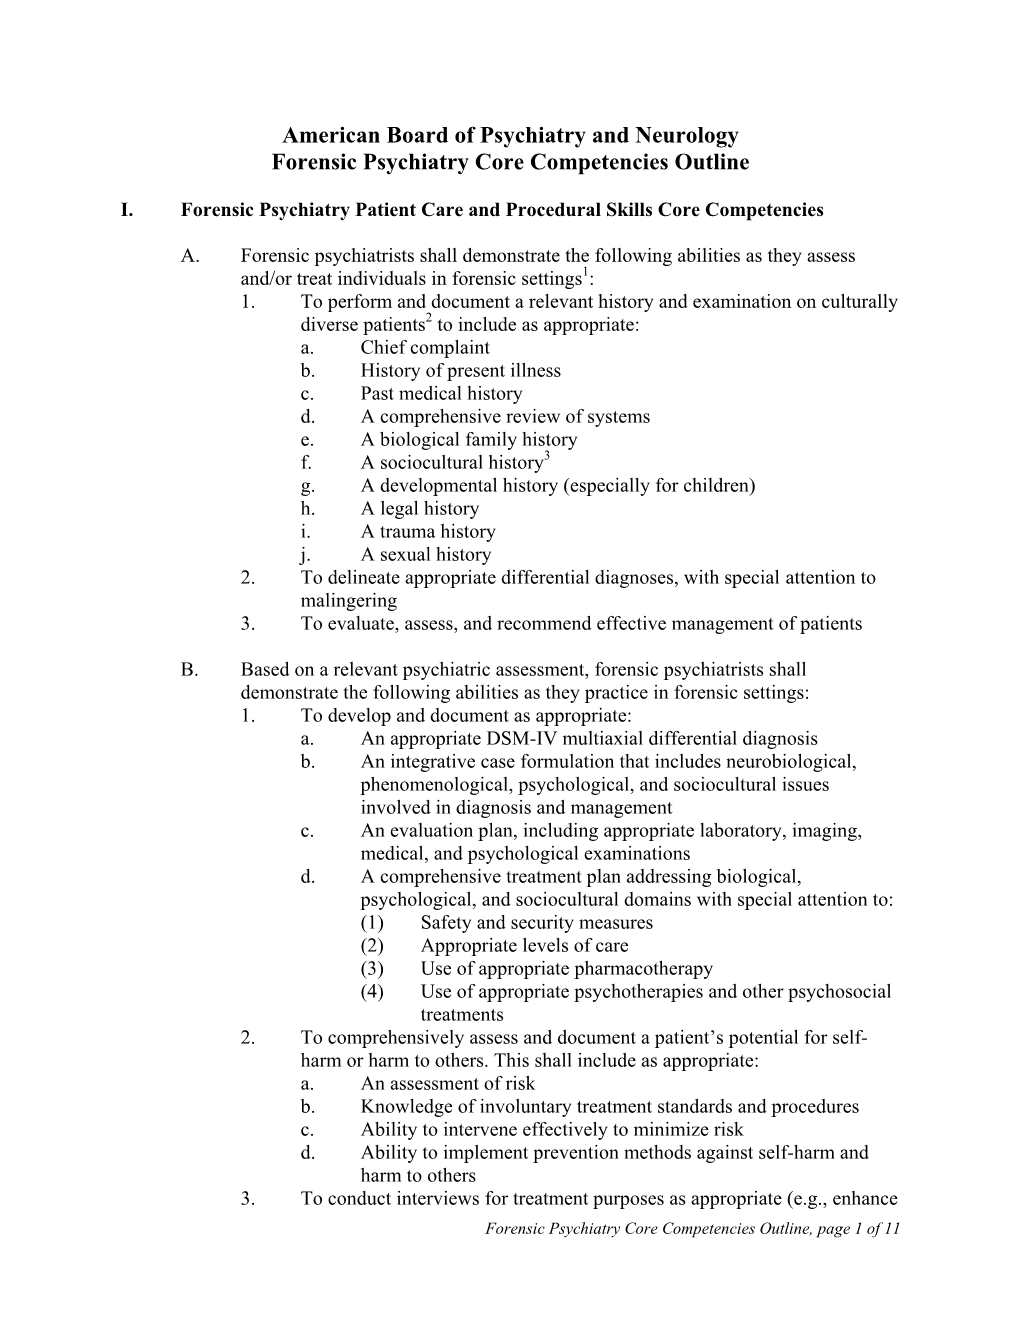 ABPN Forensic Psychiatry Core Competencies Outline